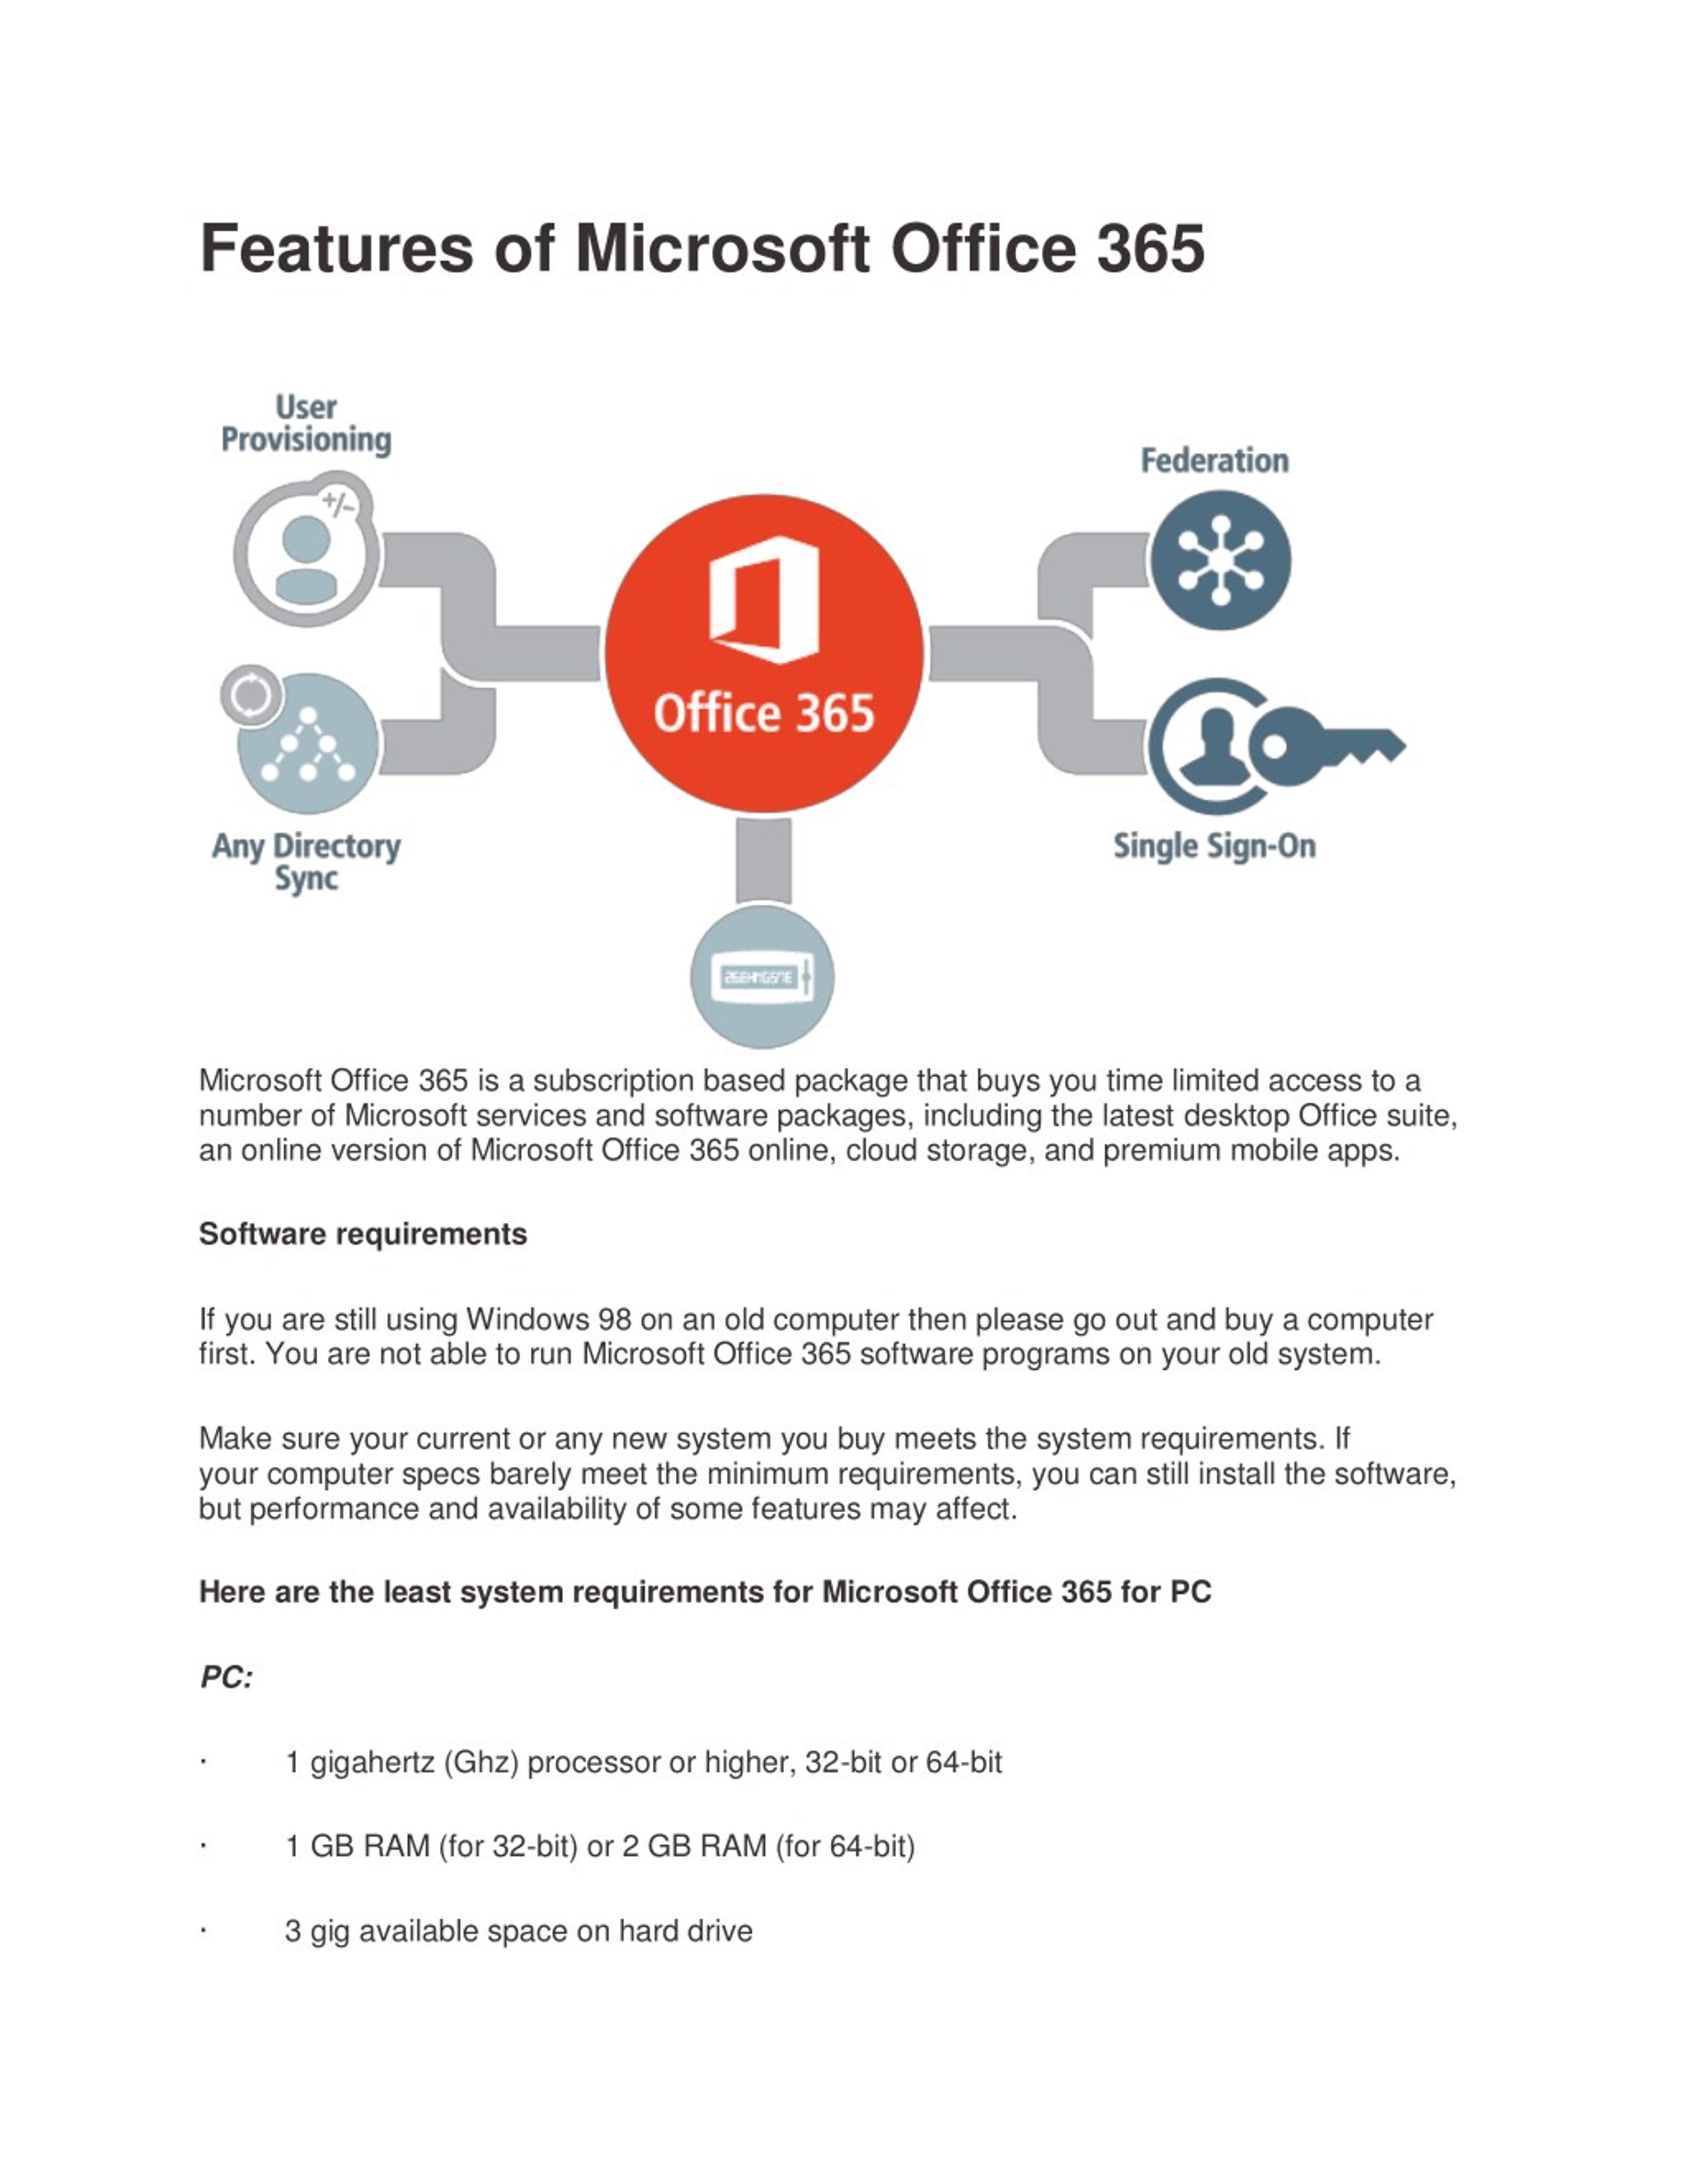 micrsoft office 365 system requirements